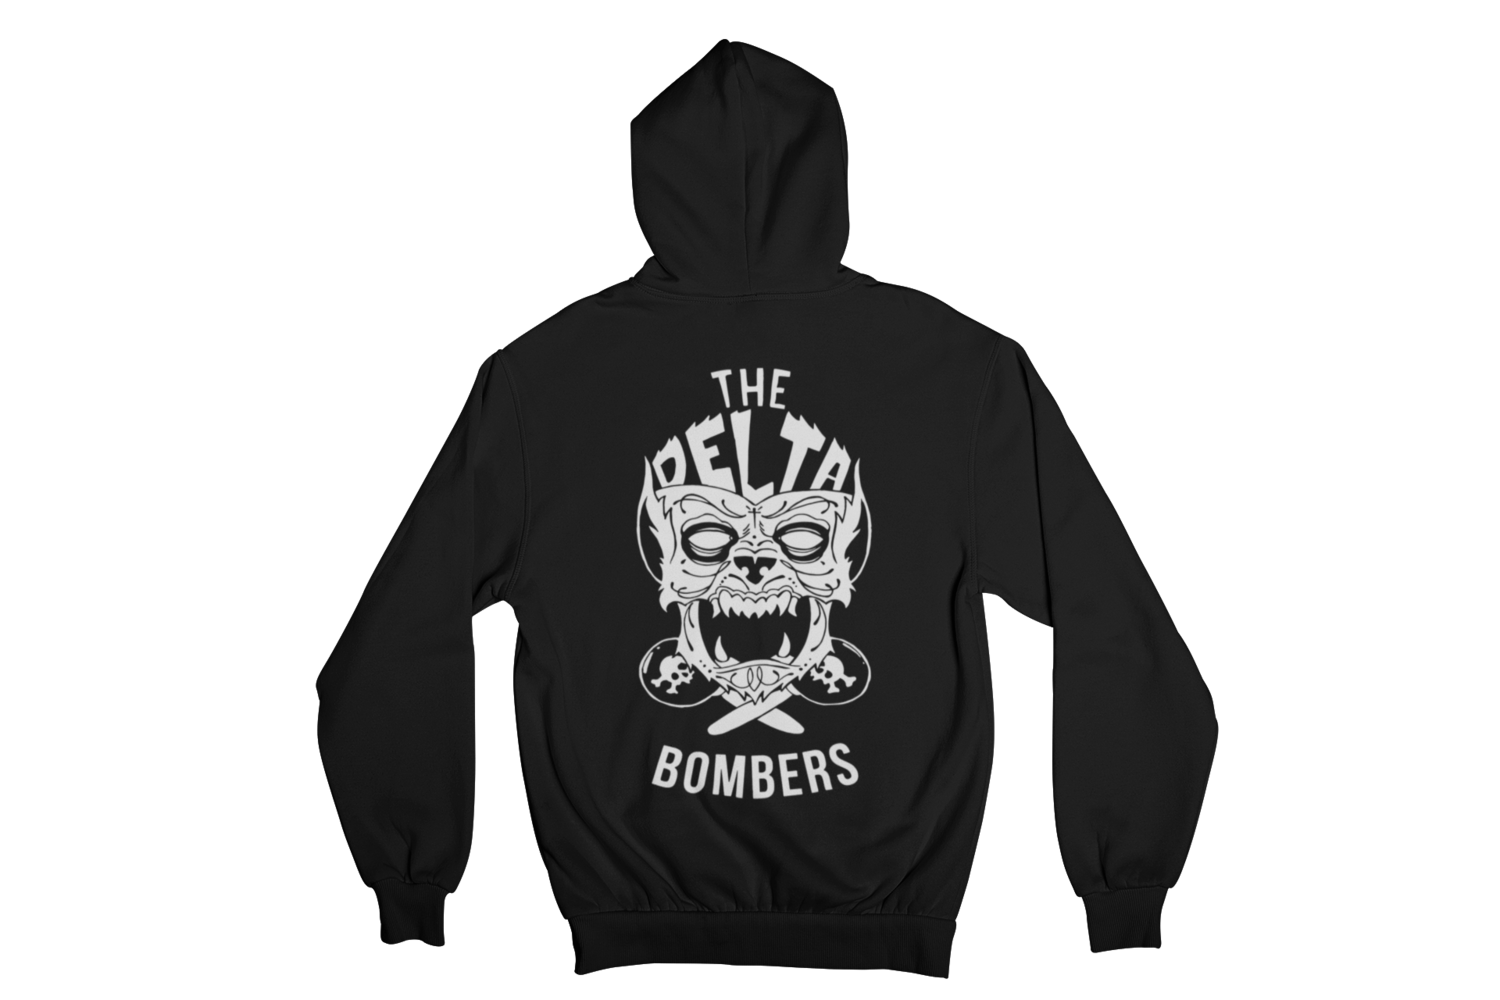 THE DELTA BOMBERS "WOLF FACE" HOODIE ZIP for WOMEN